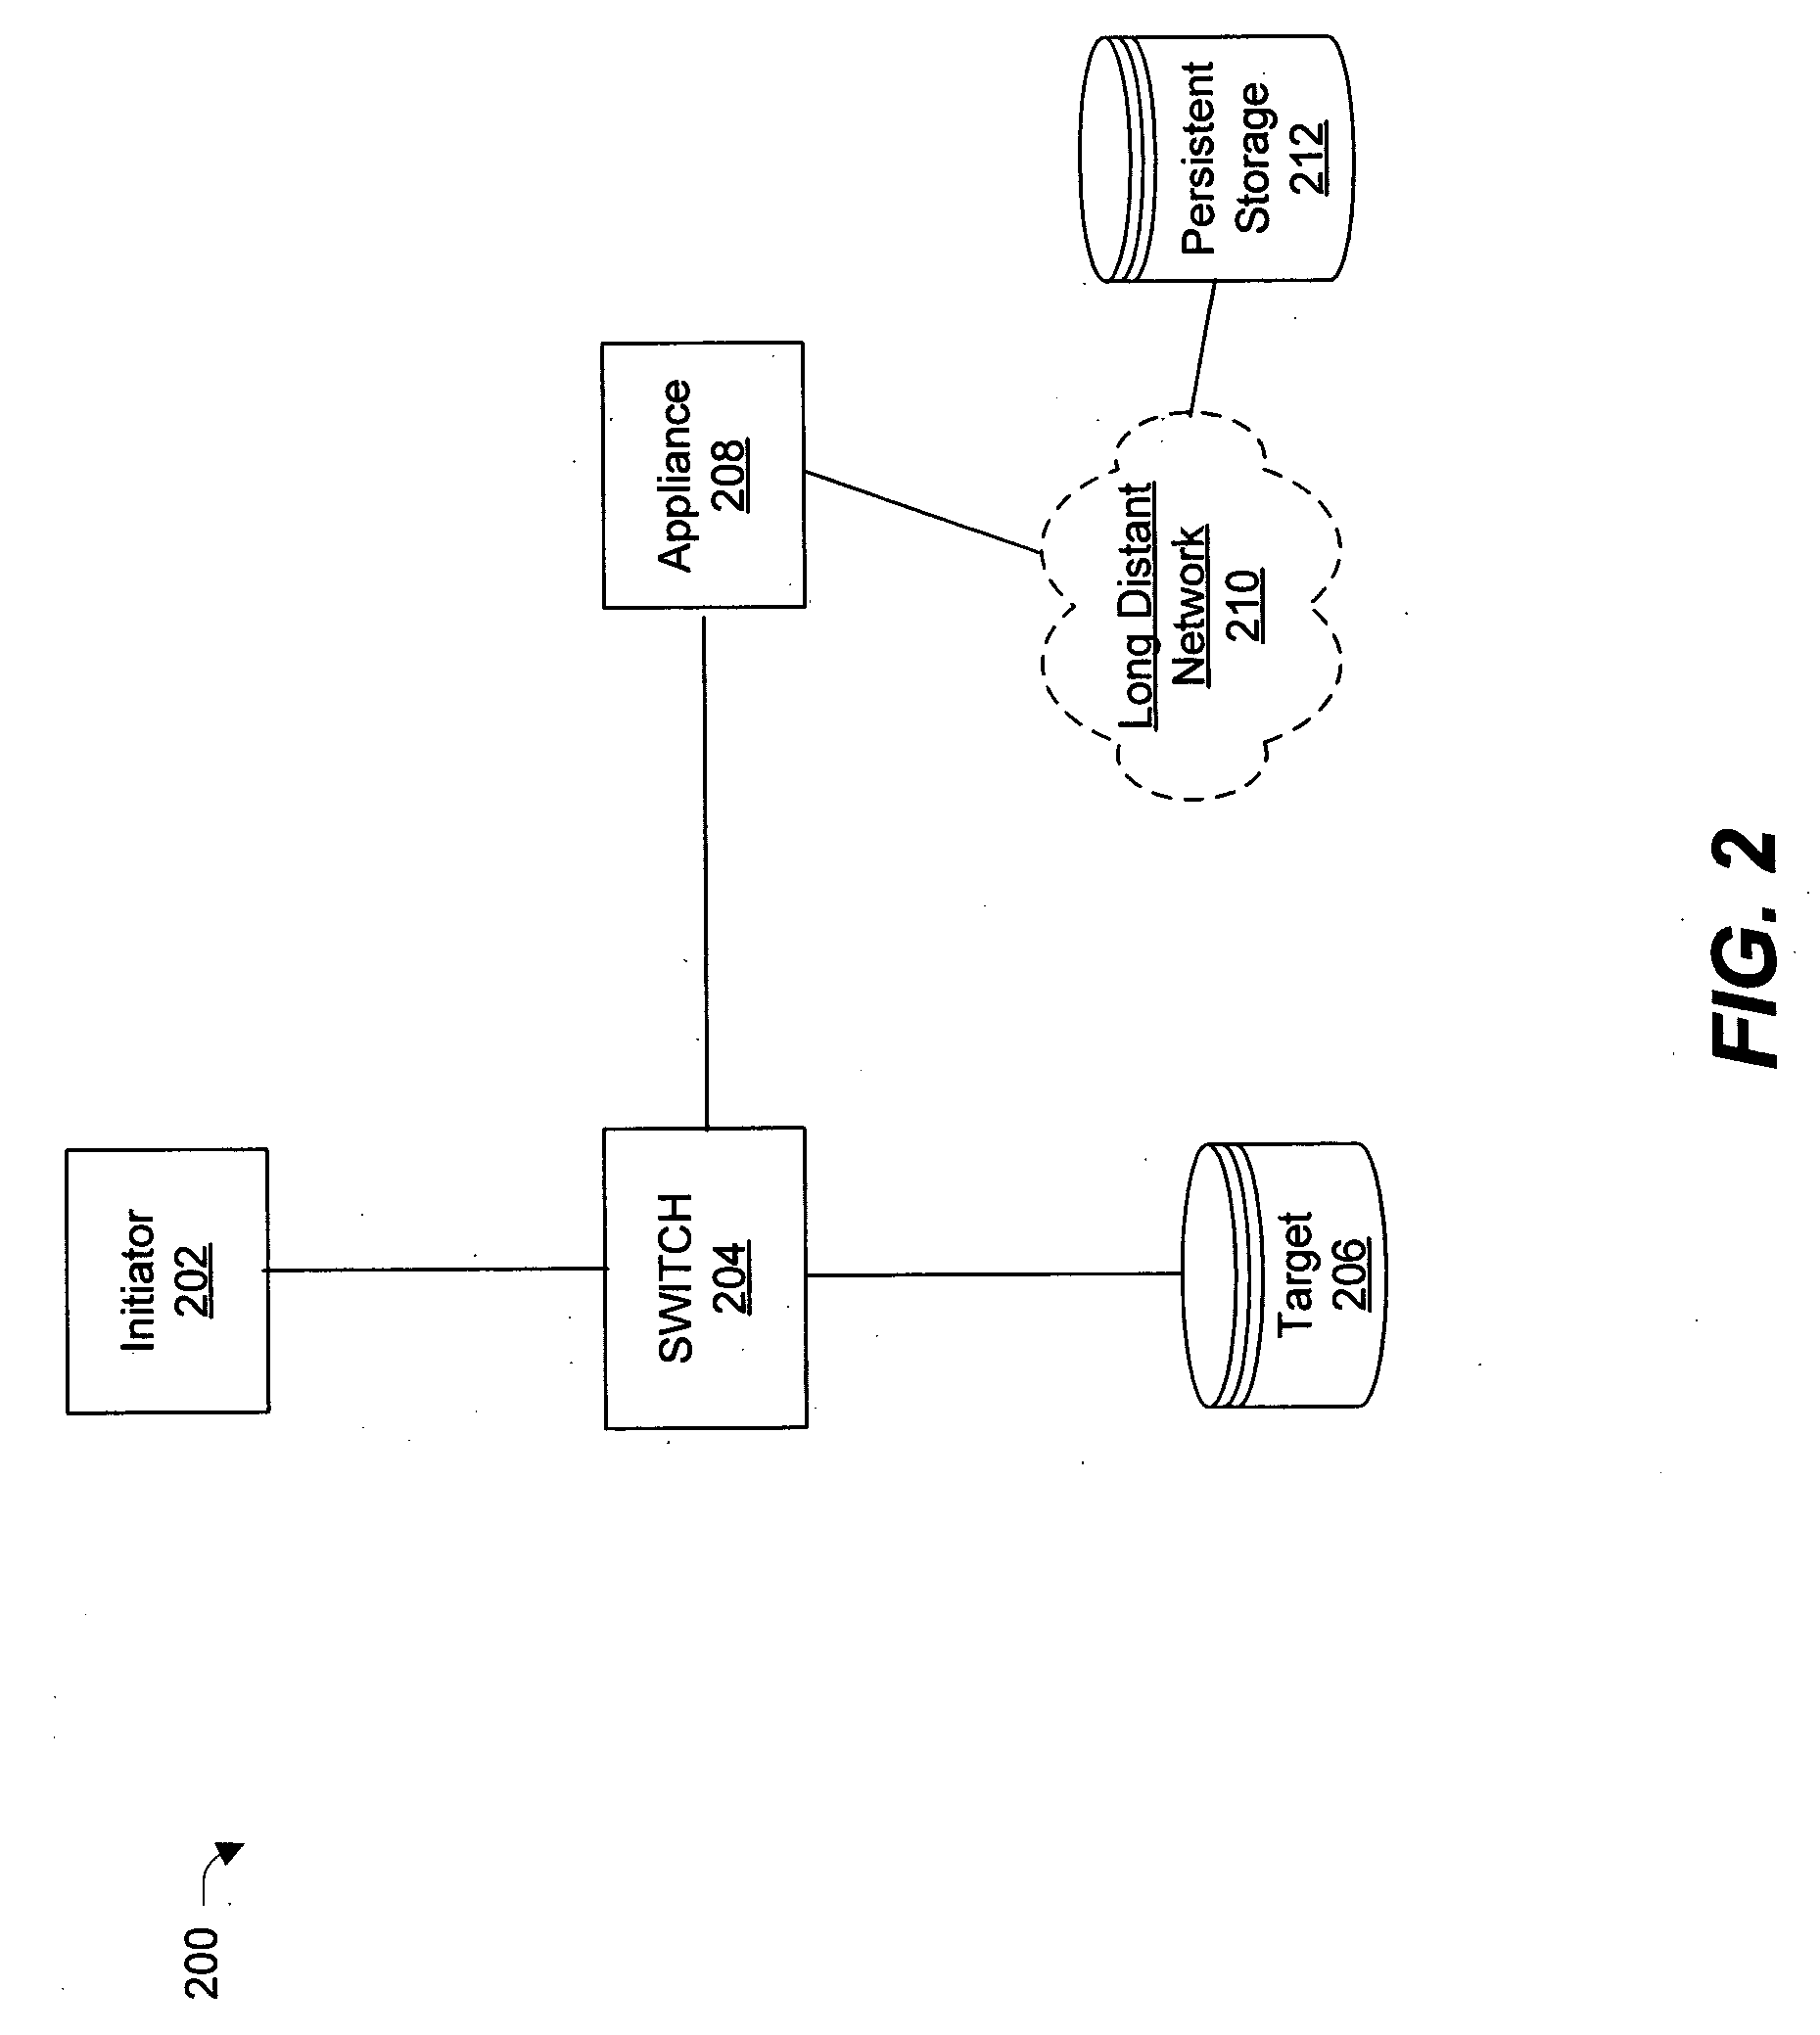 Apparatus and methods for data tapping in a storage area network